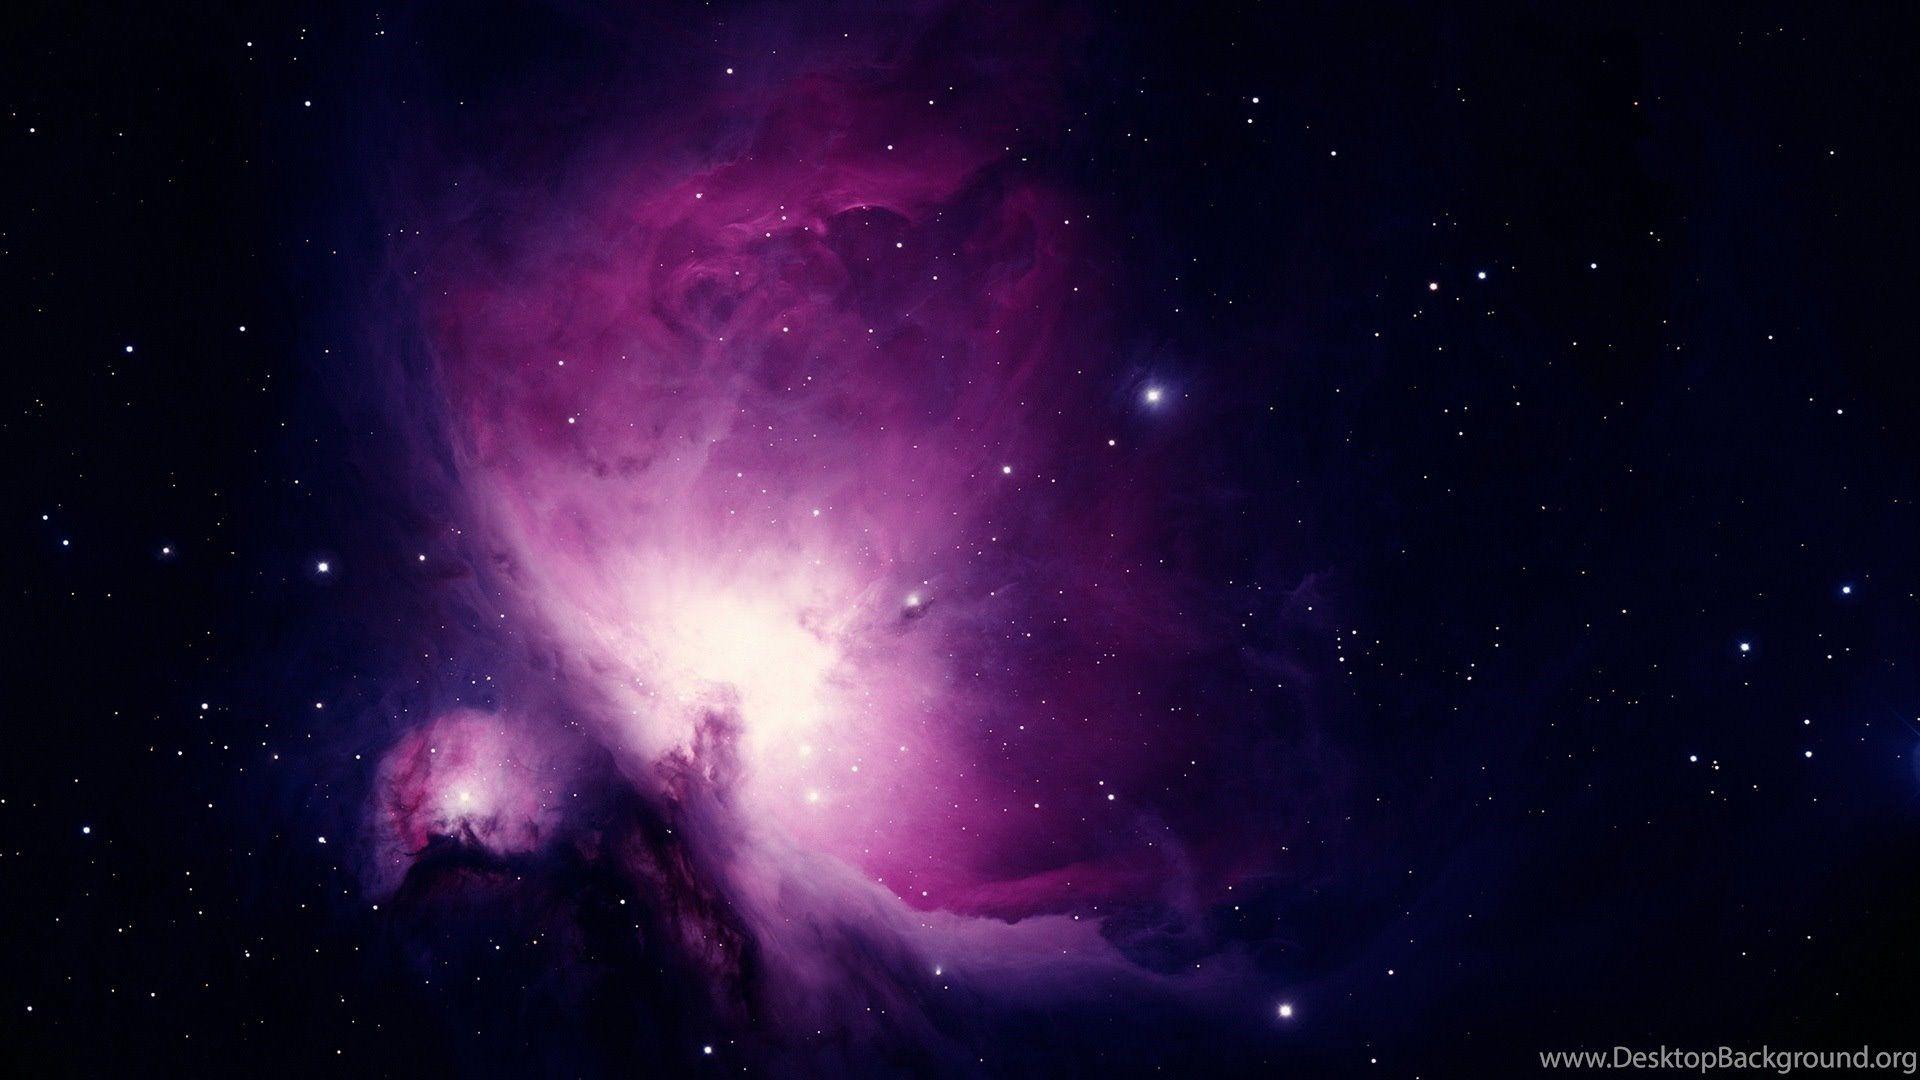 Other Wallpaper: Galaxy Tumblr iPhone Wallpaper For Desktop From